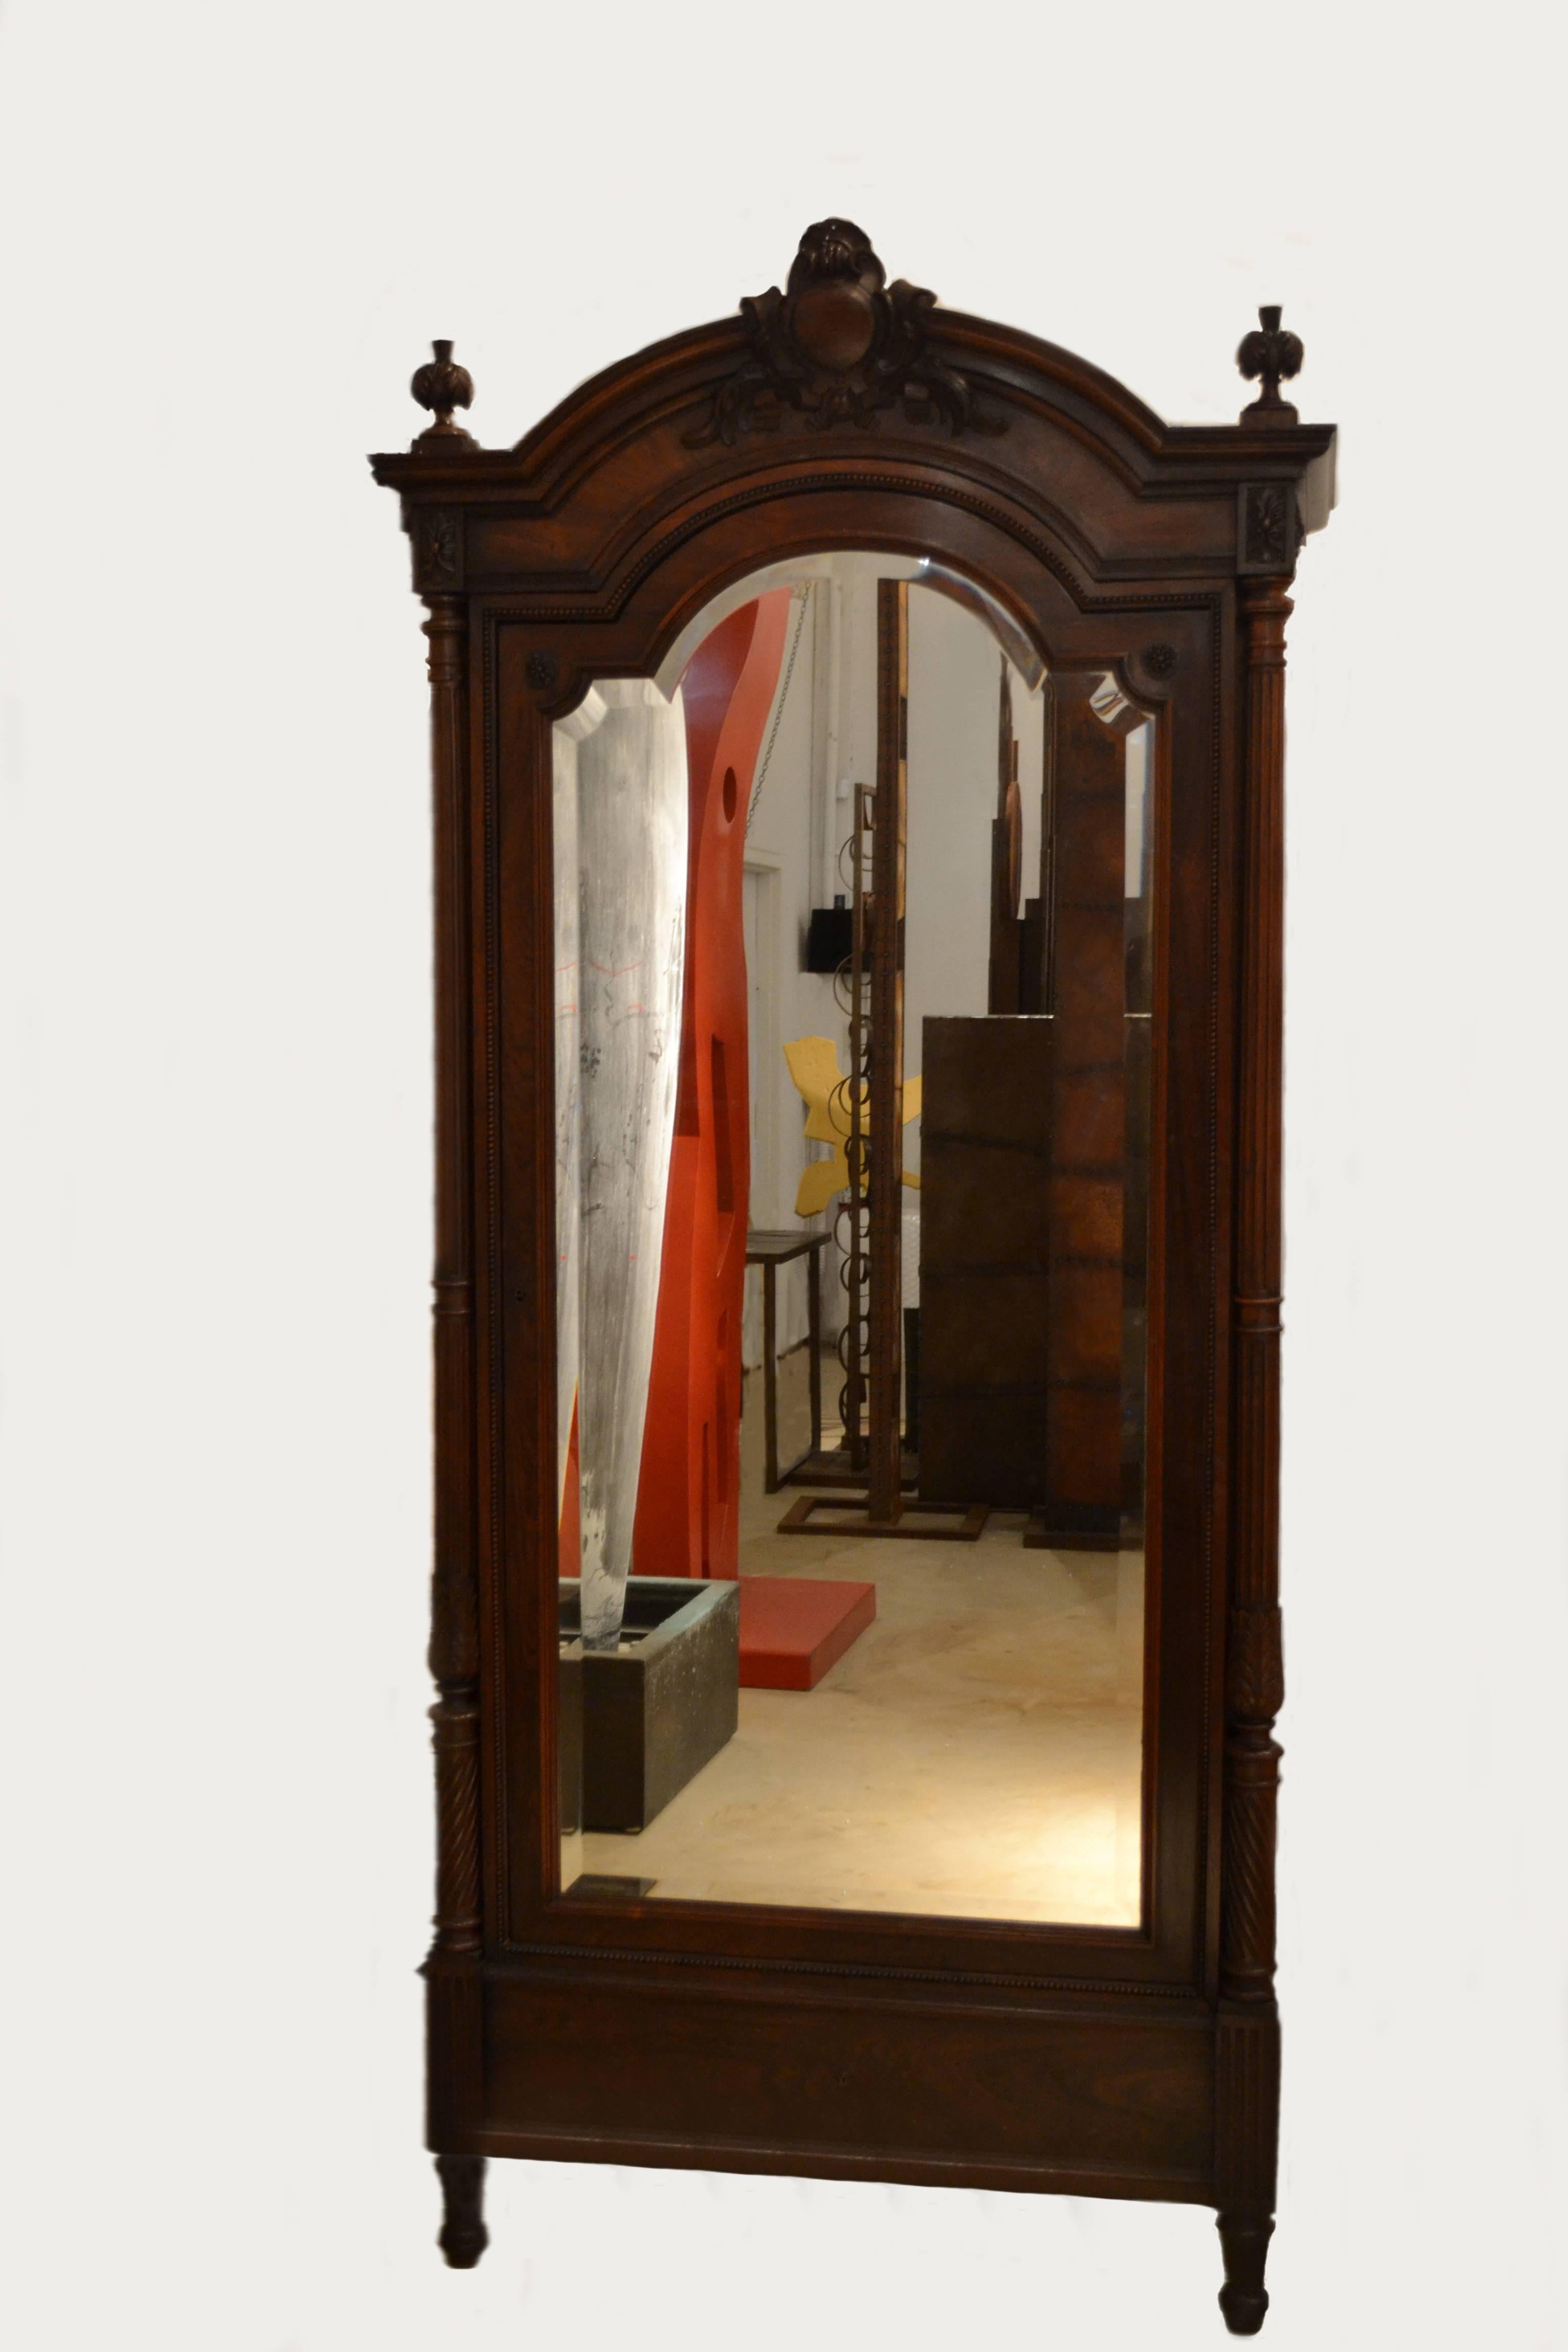 An exceptional Louis XVI rosewood armoire with bevelled mirrored door, France, circa 1870s in nearly mint condition. Some minor alterations to the interior of the armoire. The armoire's provenance is that it originates from the estate and Palm